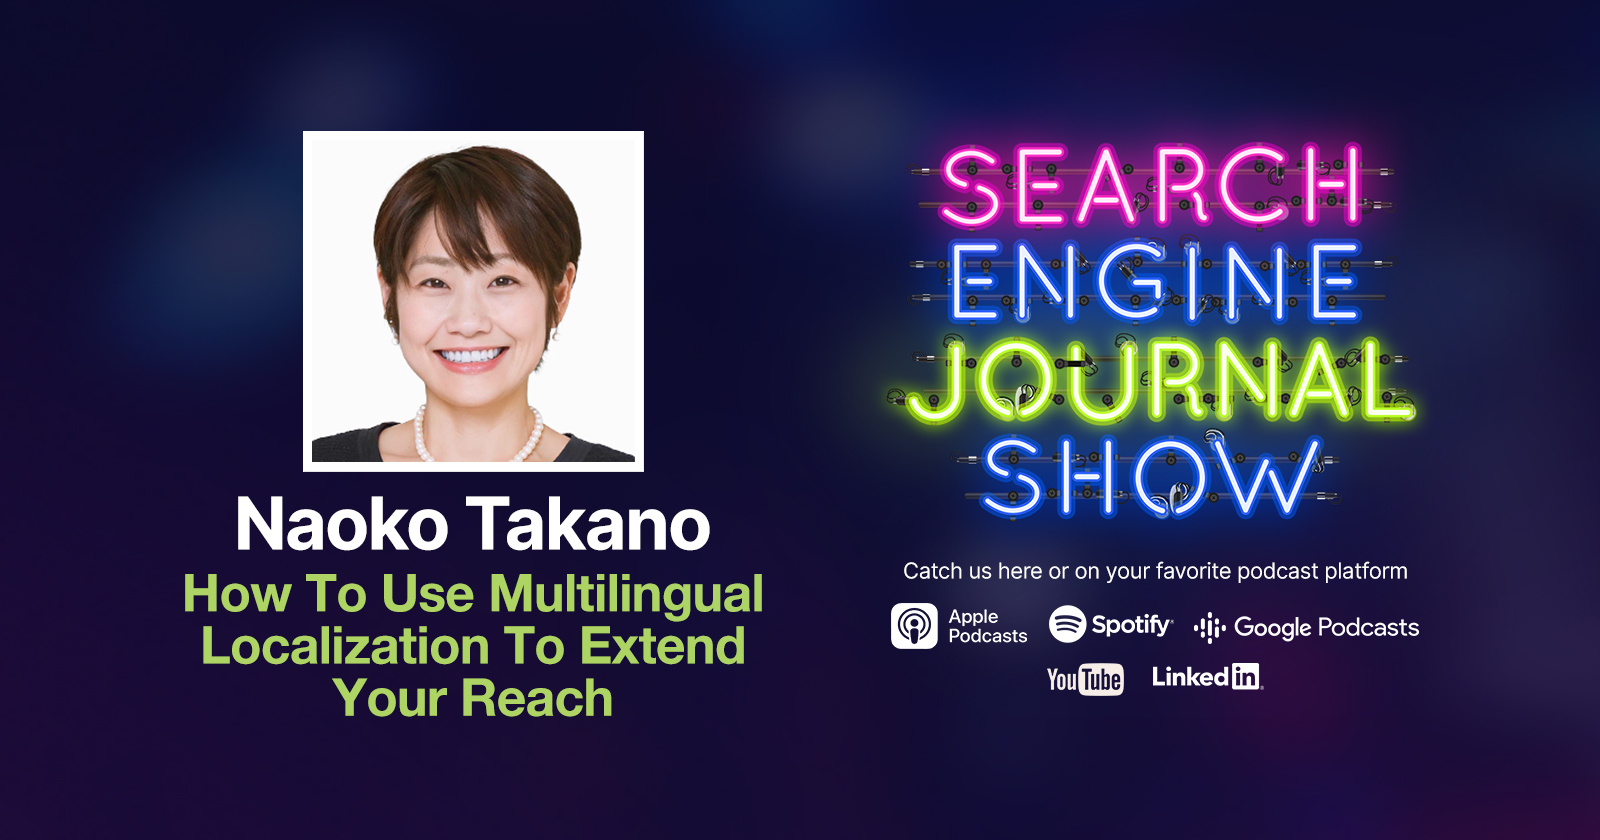 How To Use Multilingual Localization To Extend Your Reach [Podcast]